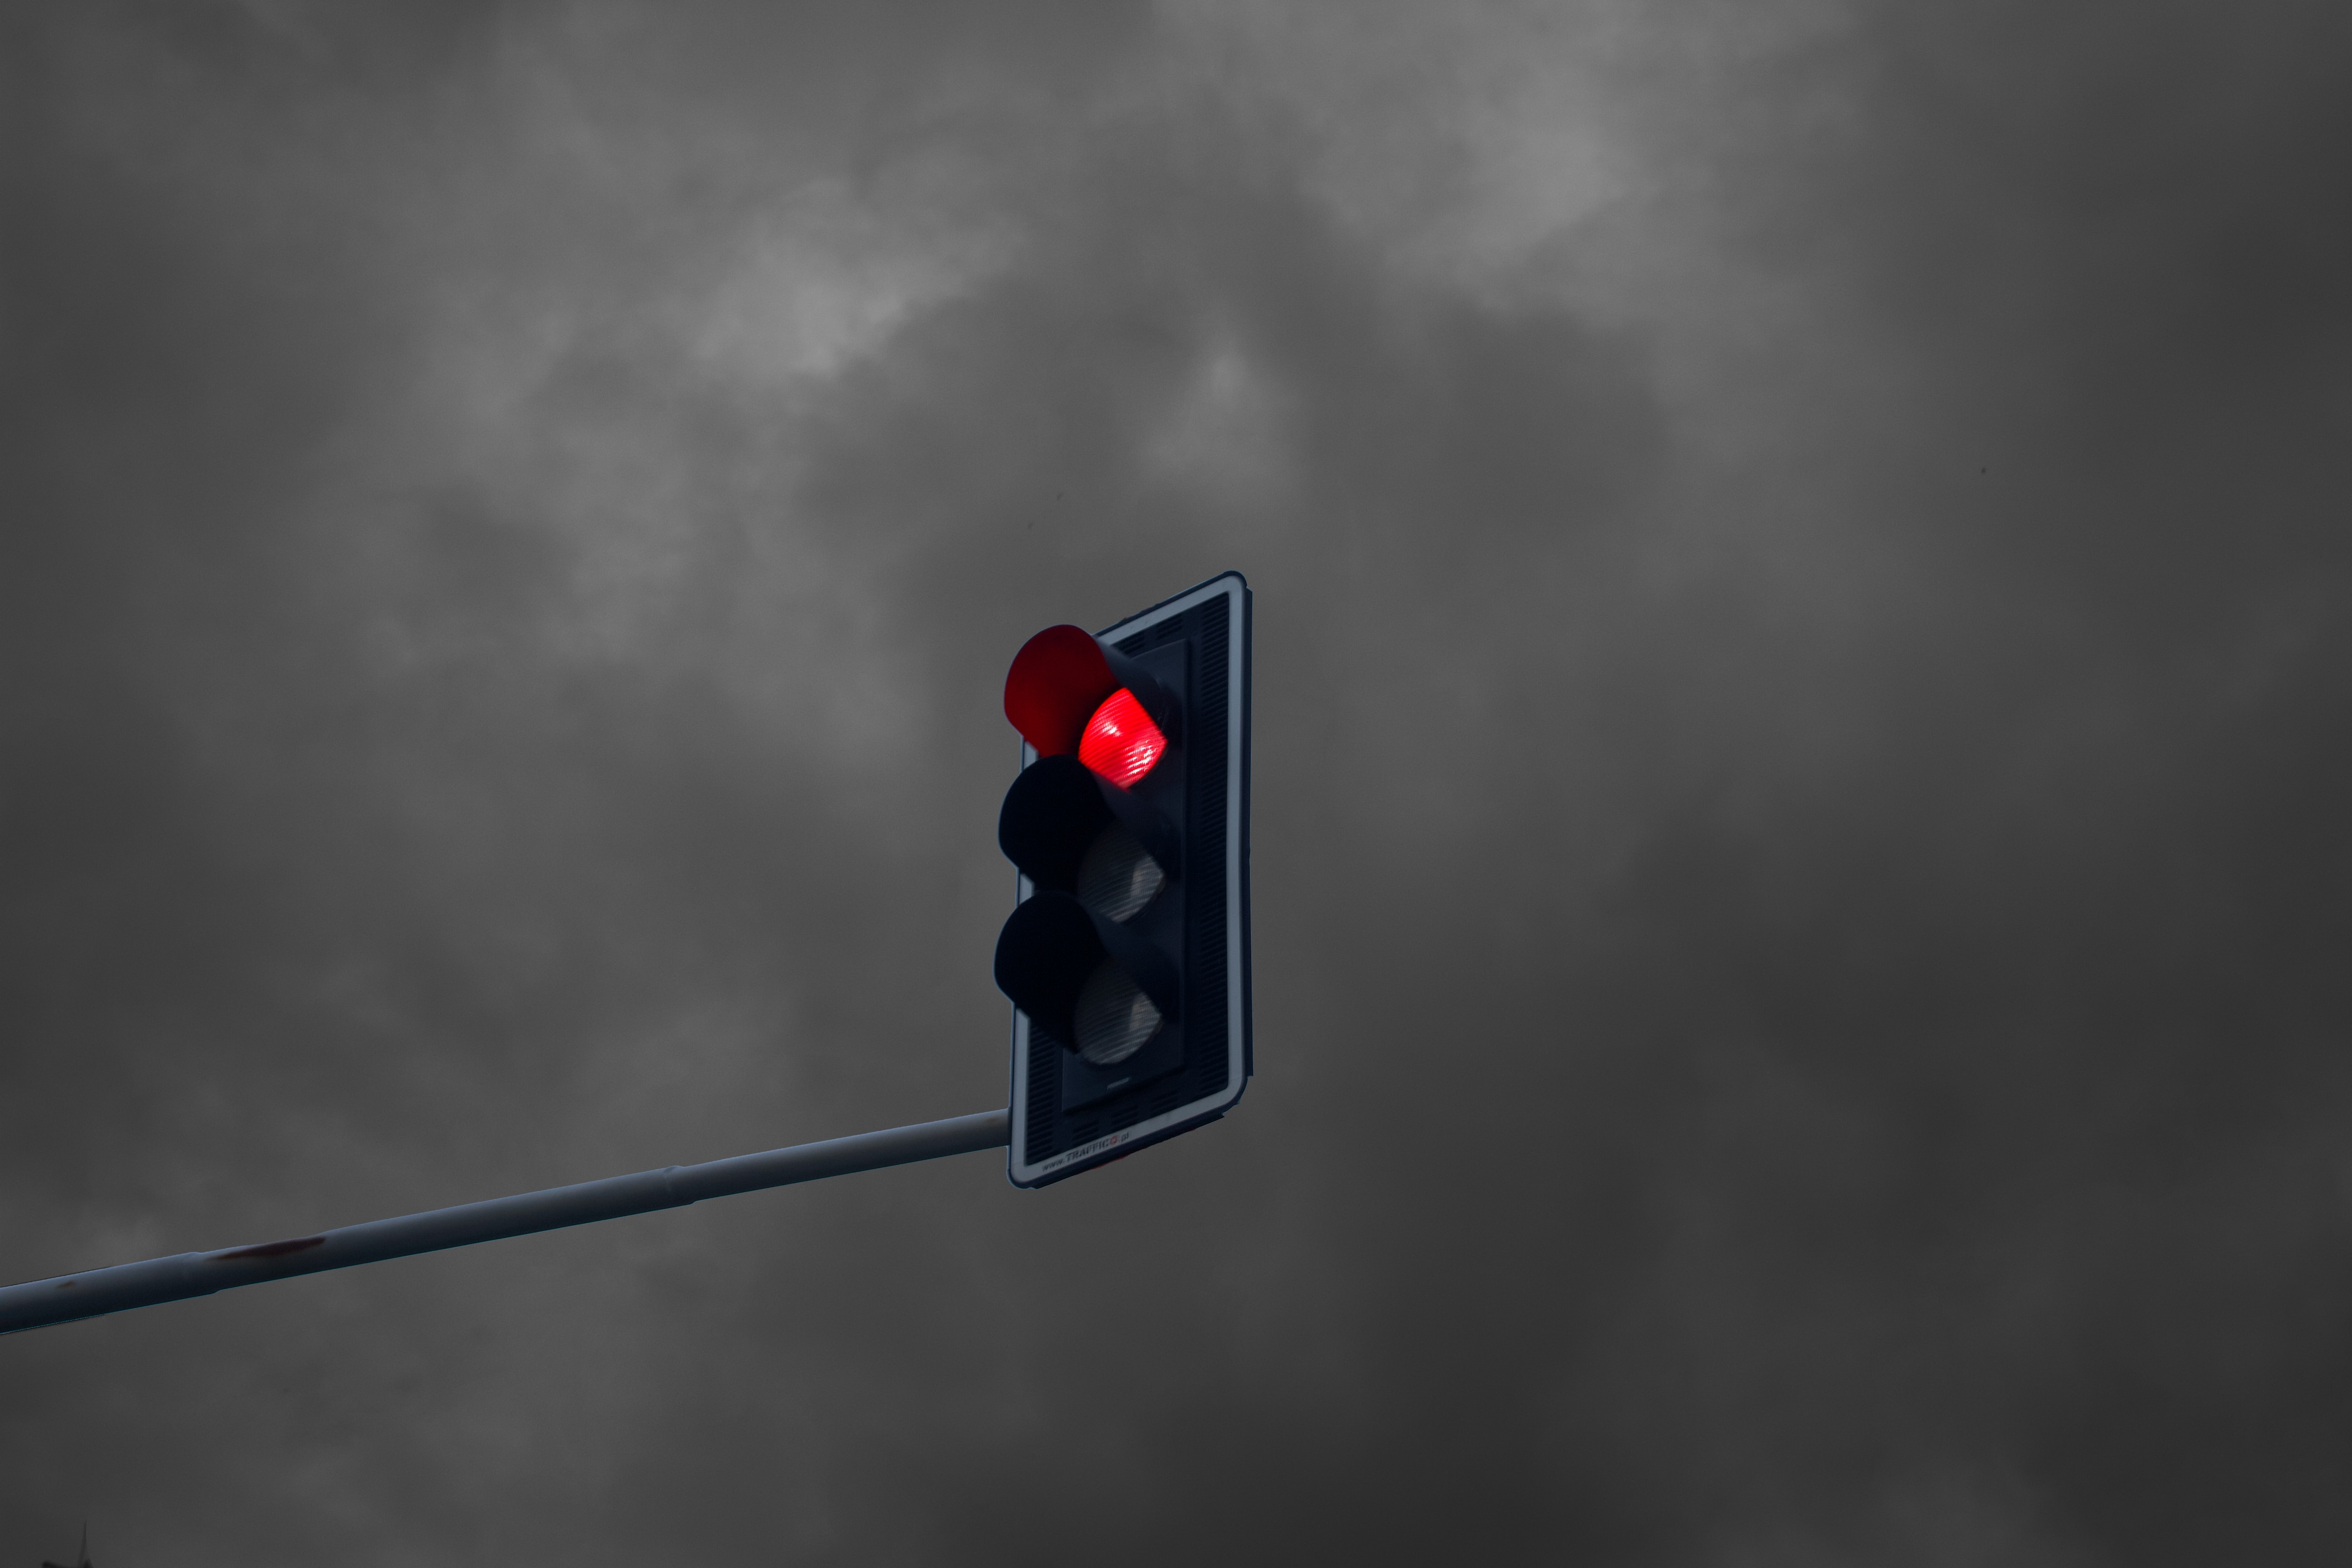 traffic light, clouds, red, miscellanea, miscellaneous, glow